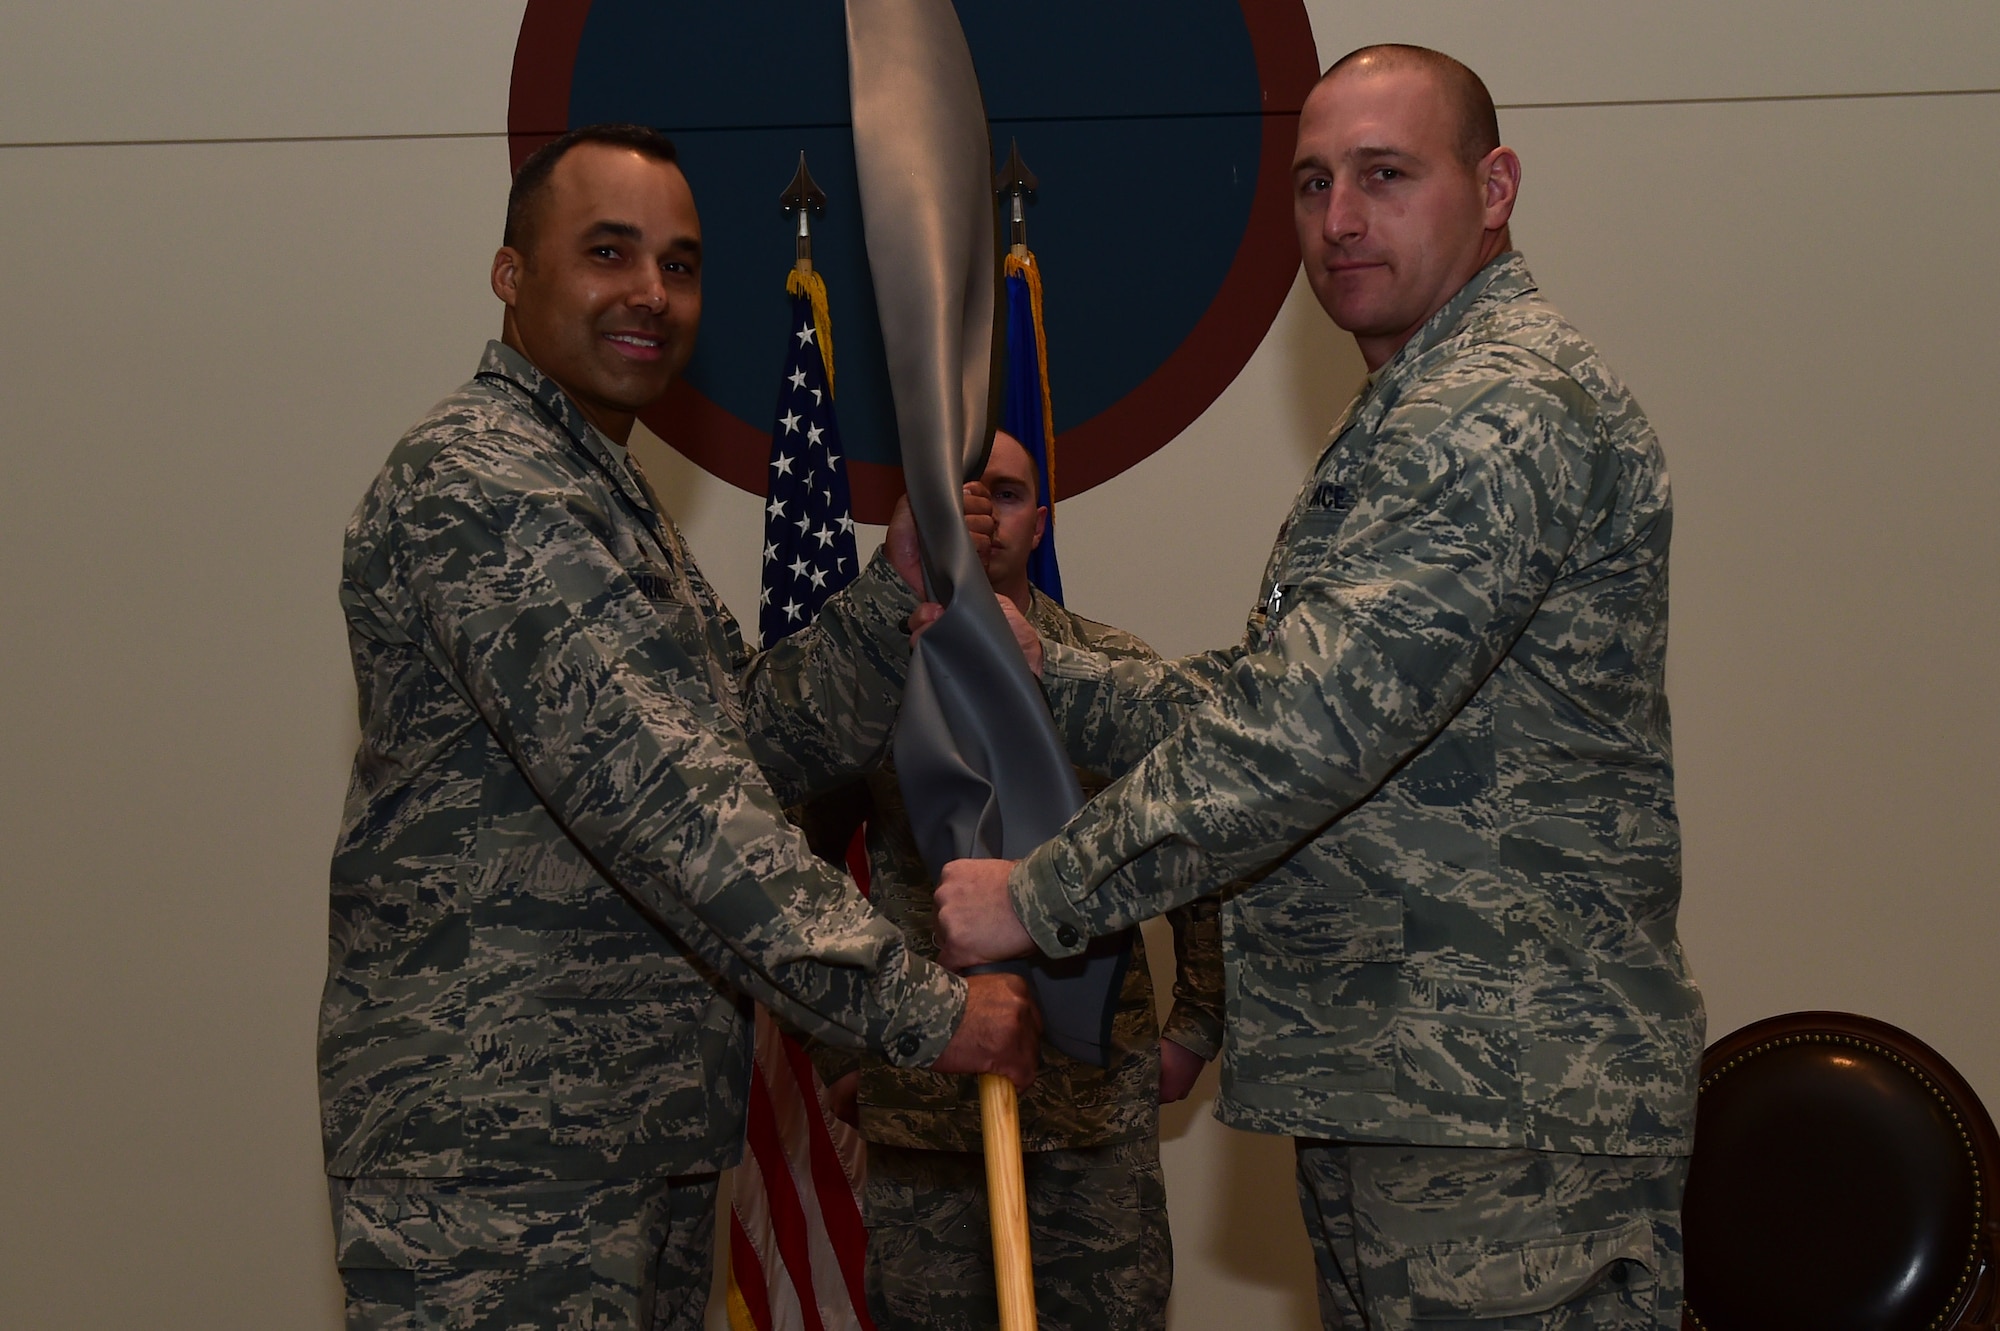 Lt. Col. Craig Thorstenson, 460th Operations Group, Detachment 1 commander, passes the rolled up guidon to Col. Lorenzo Bradley, 460th Operations Group commander, during the 460th OG Det. 1 deactivation ceremony Jan. 11, 2017, at the Leadership Development Center on Buckley Air Force Base, Colo. In 2013 and 2015, Det. 1 was the winner of the General Seth J. McKee Award, which is awarded to the best missile warning unit. (U.S. Air Force photo by Airman 1st Class Gabrielle Spradling/Released)